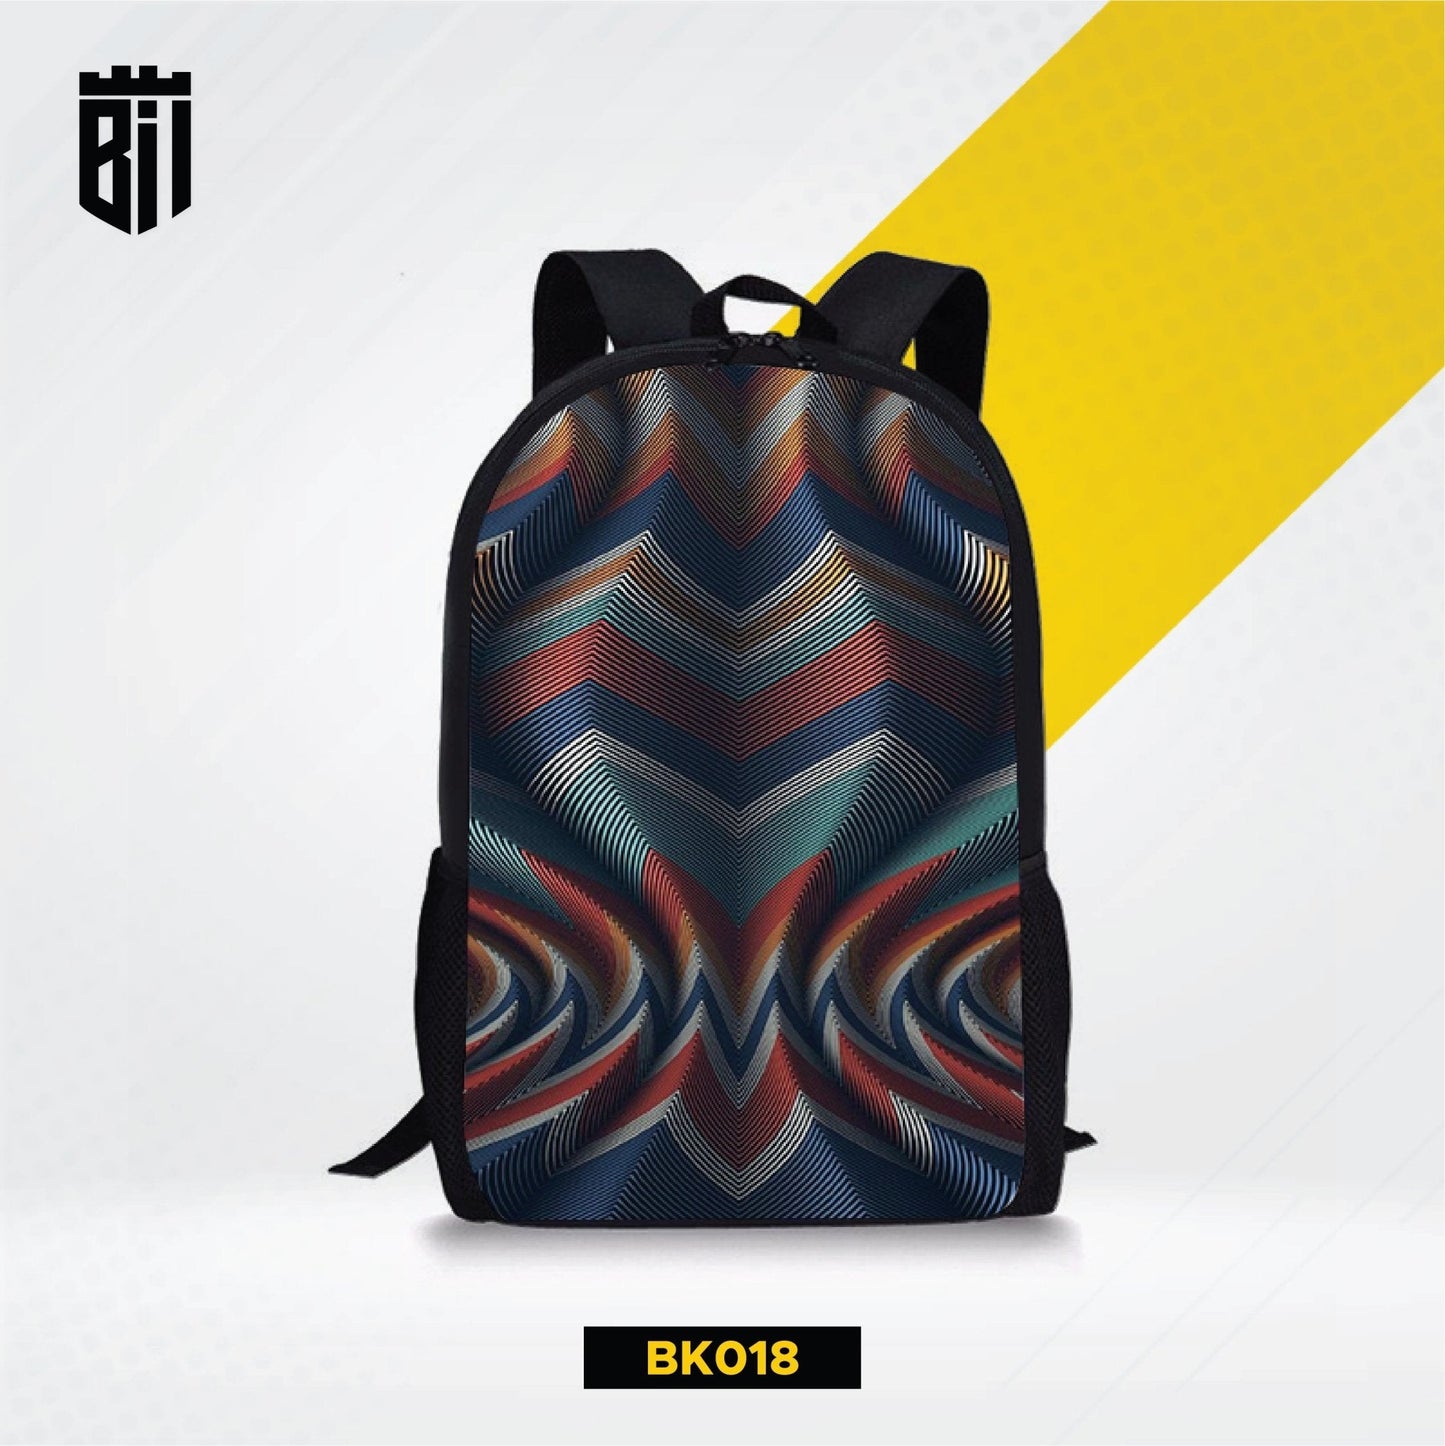 BK018 Colorful Abstract Backpack - BREACHIT